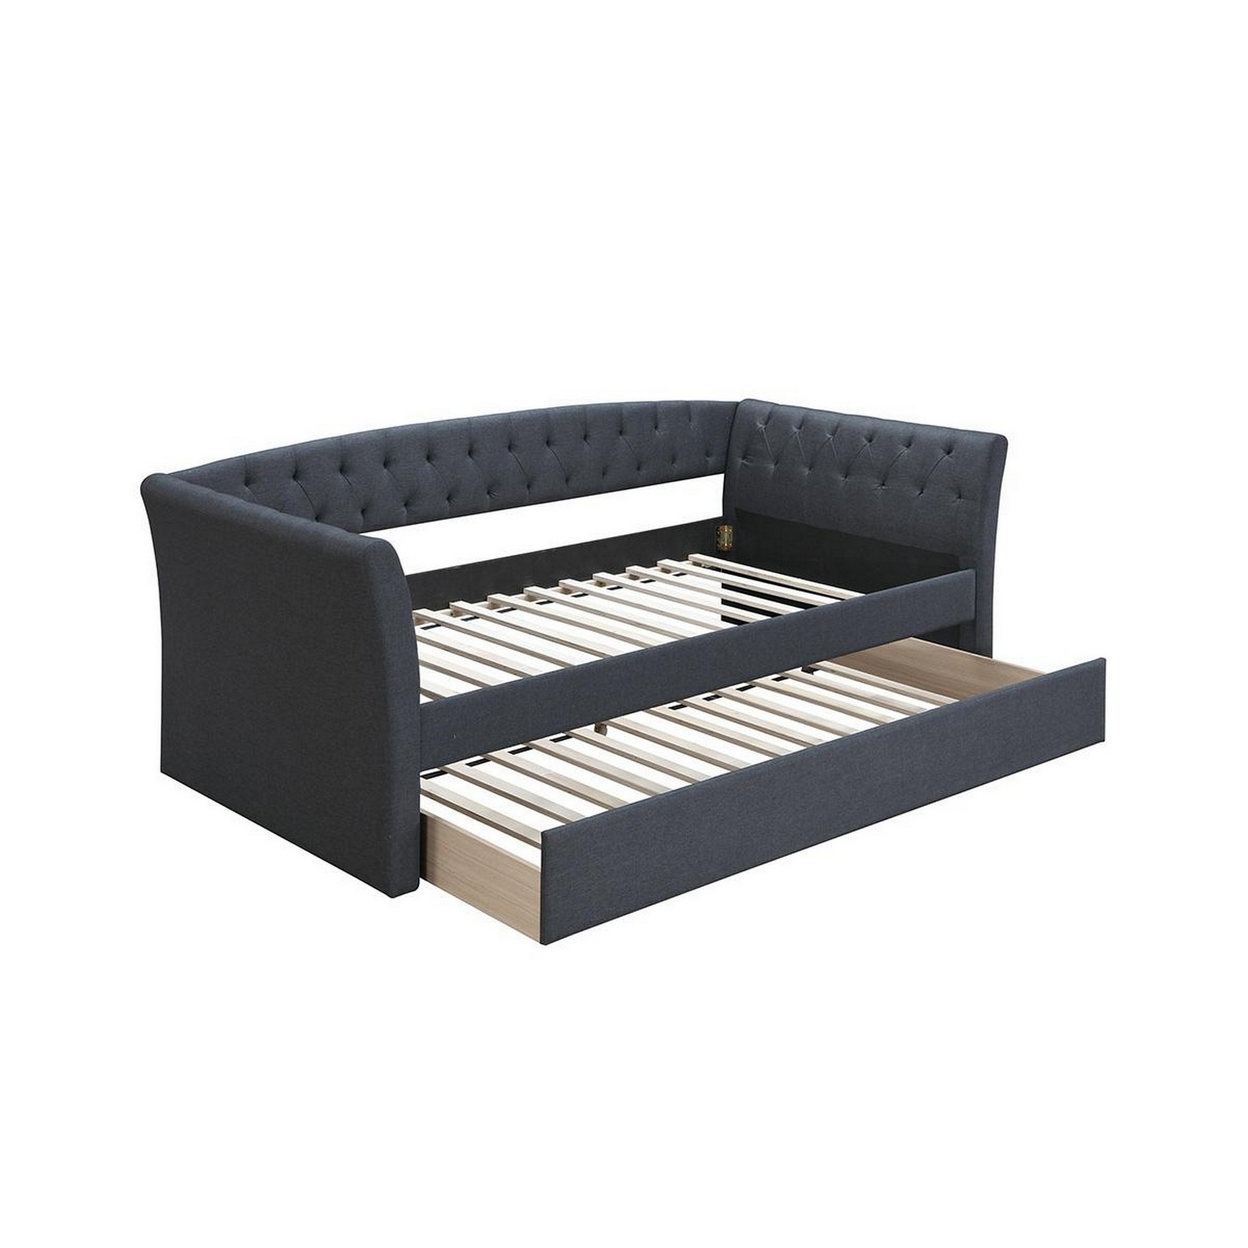 Alma Classic Wood Daybed With Trundle, Button Tufted, Charcoal Burlap- Saltoro Sherpi